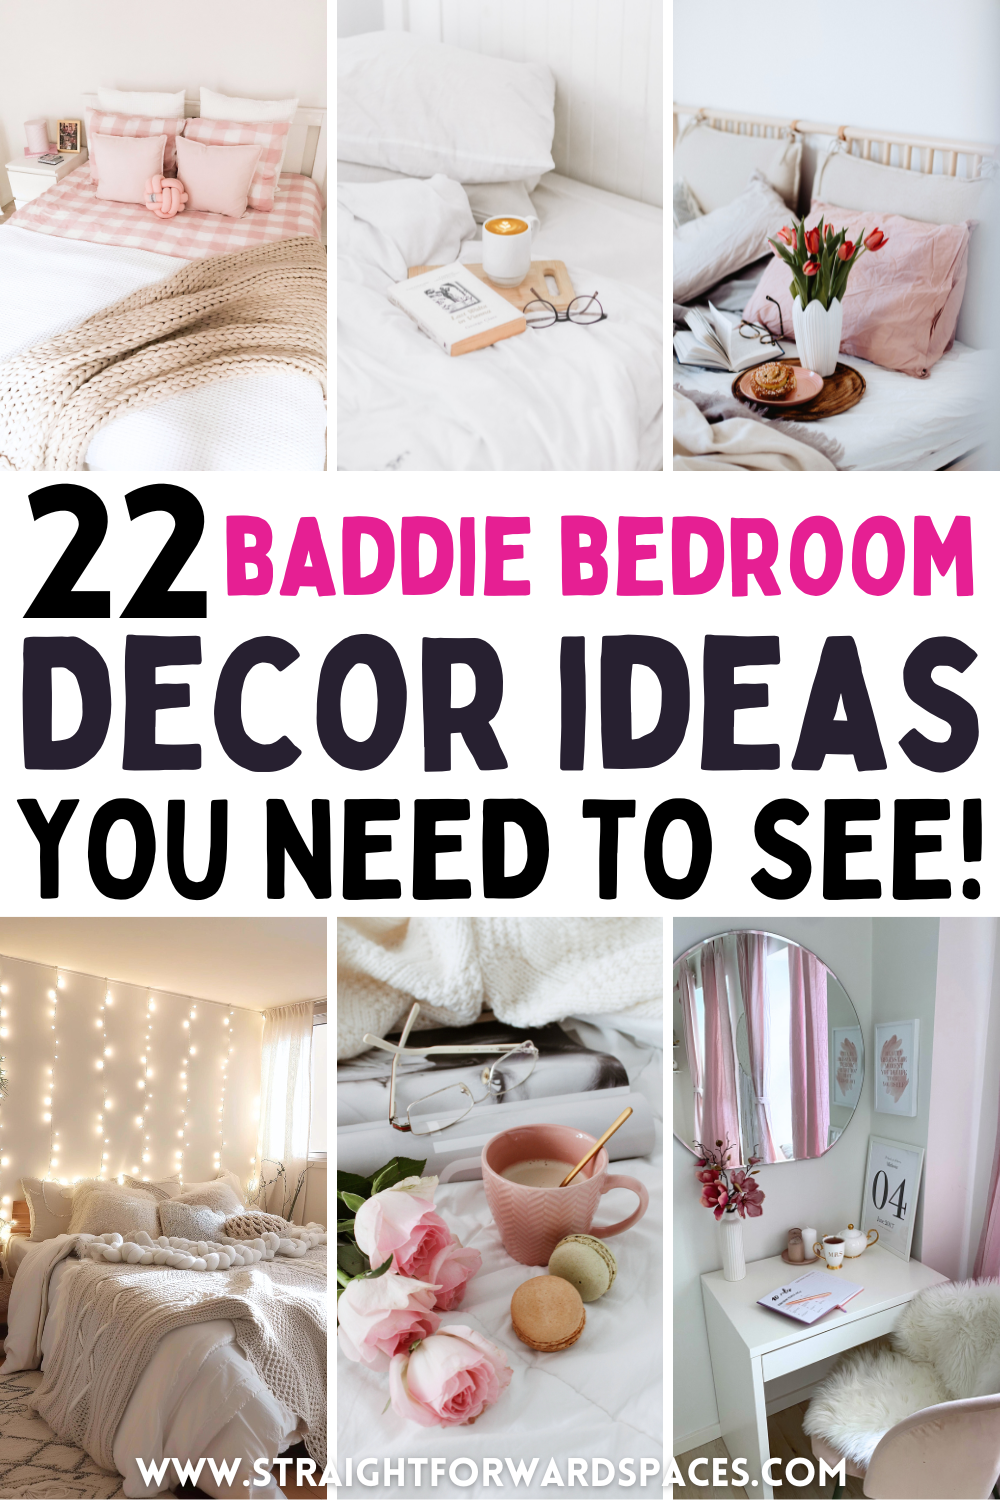 Baddie bedroom decor ideas with pink and white furniture